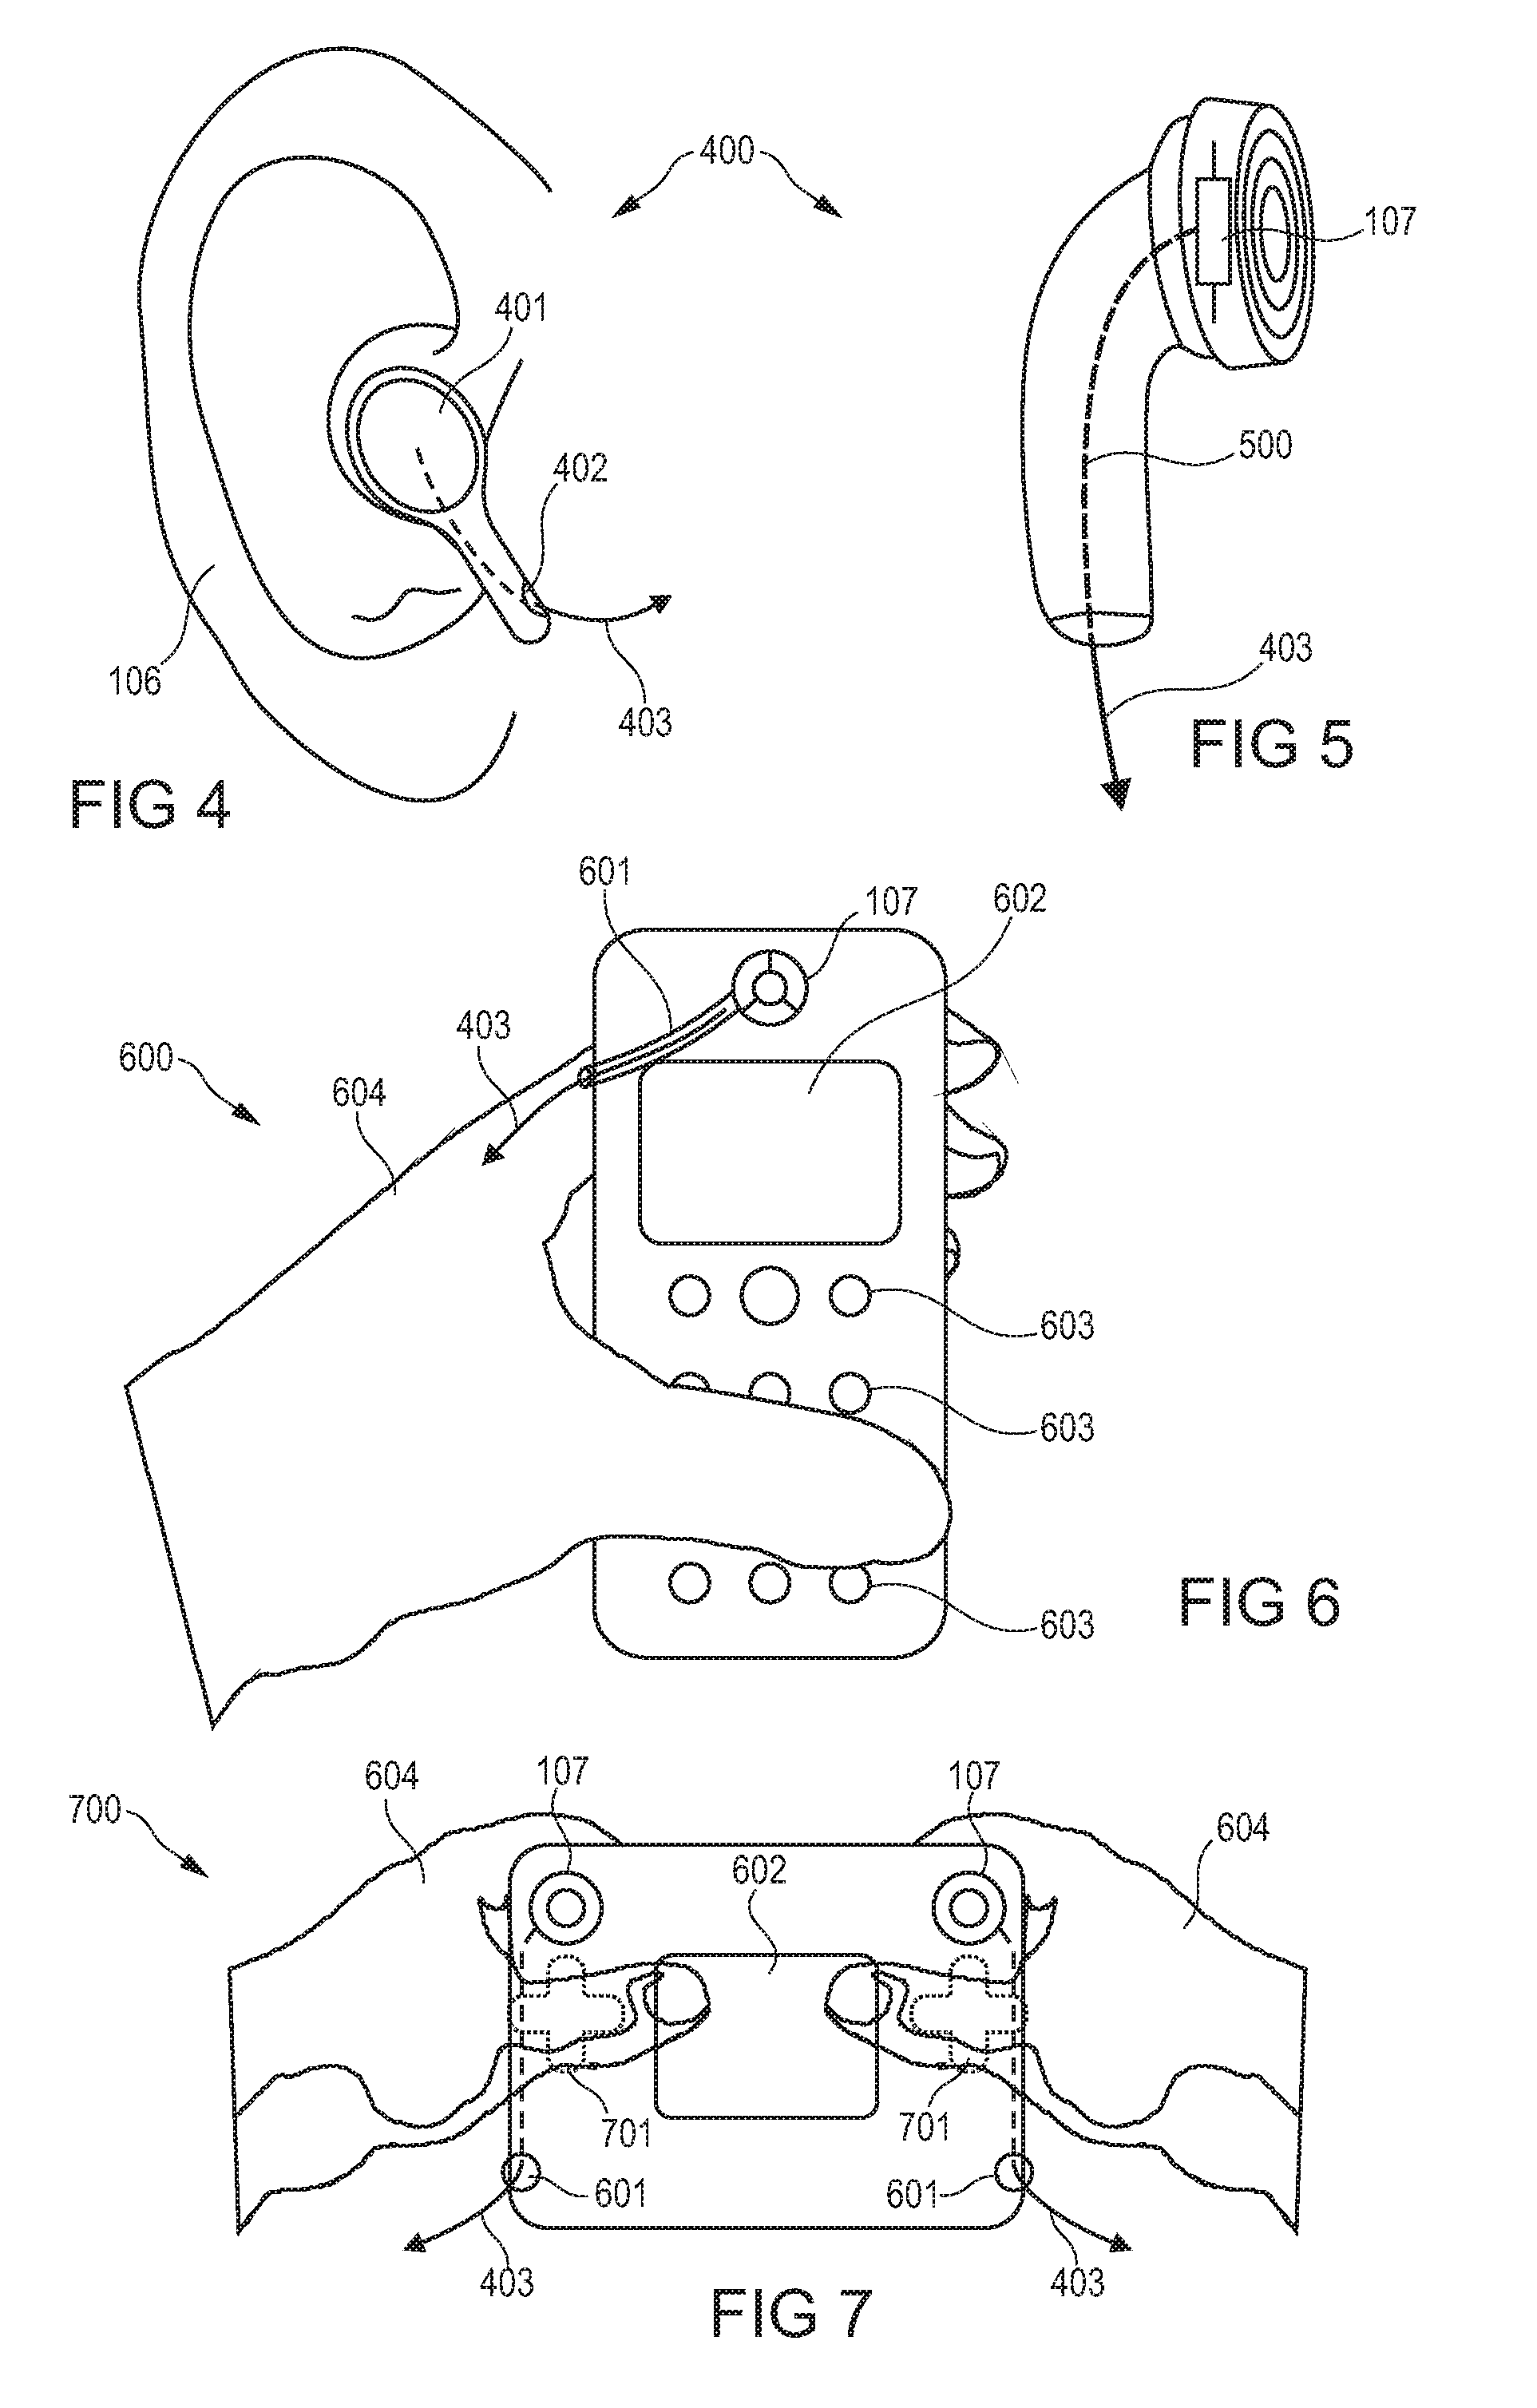 Device for and method of processing an audio signal and/or a video signal to generate haptic excitation